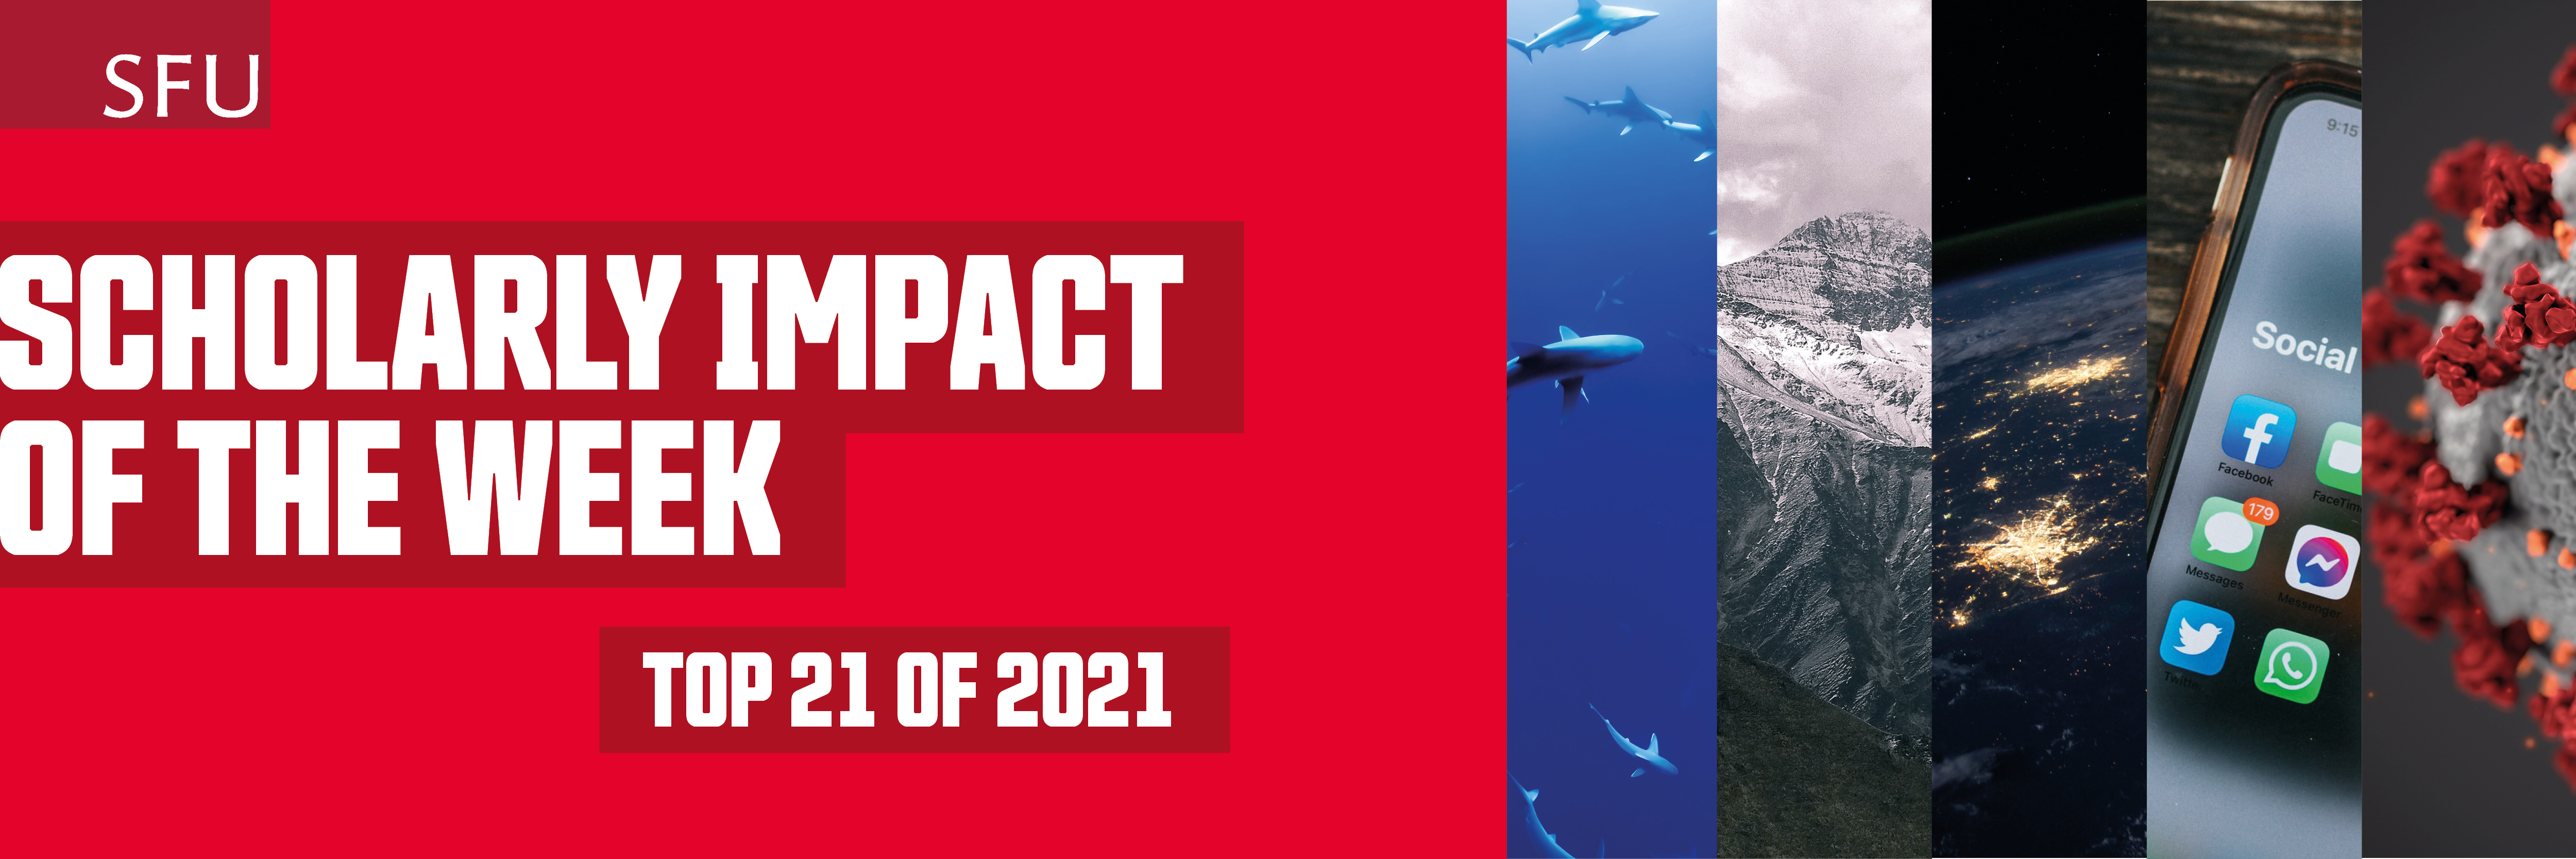 Scholarly Impact of the Week: Top 21 of 2021